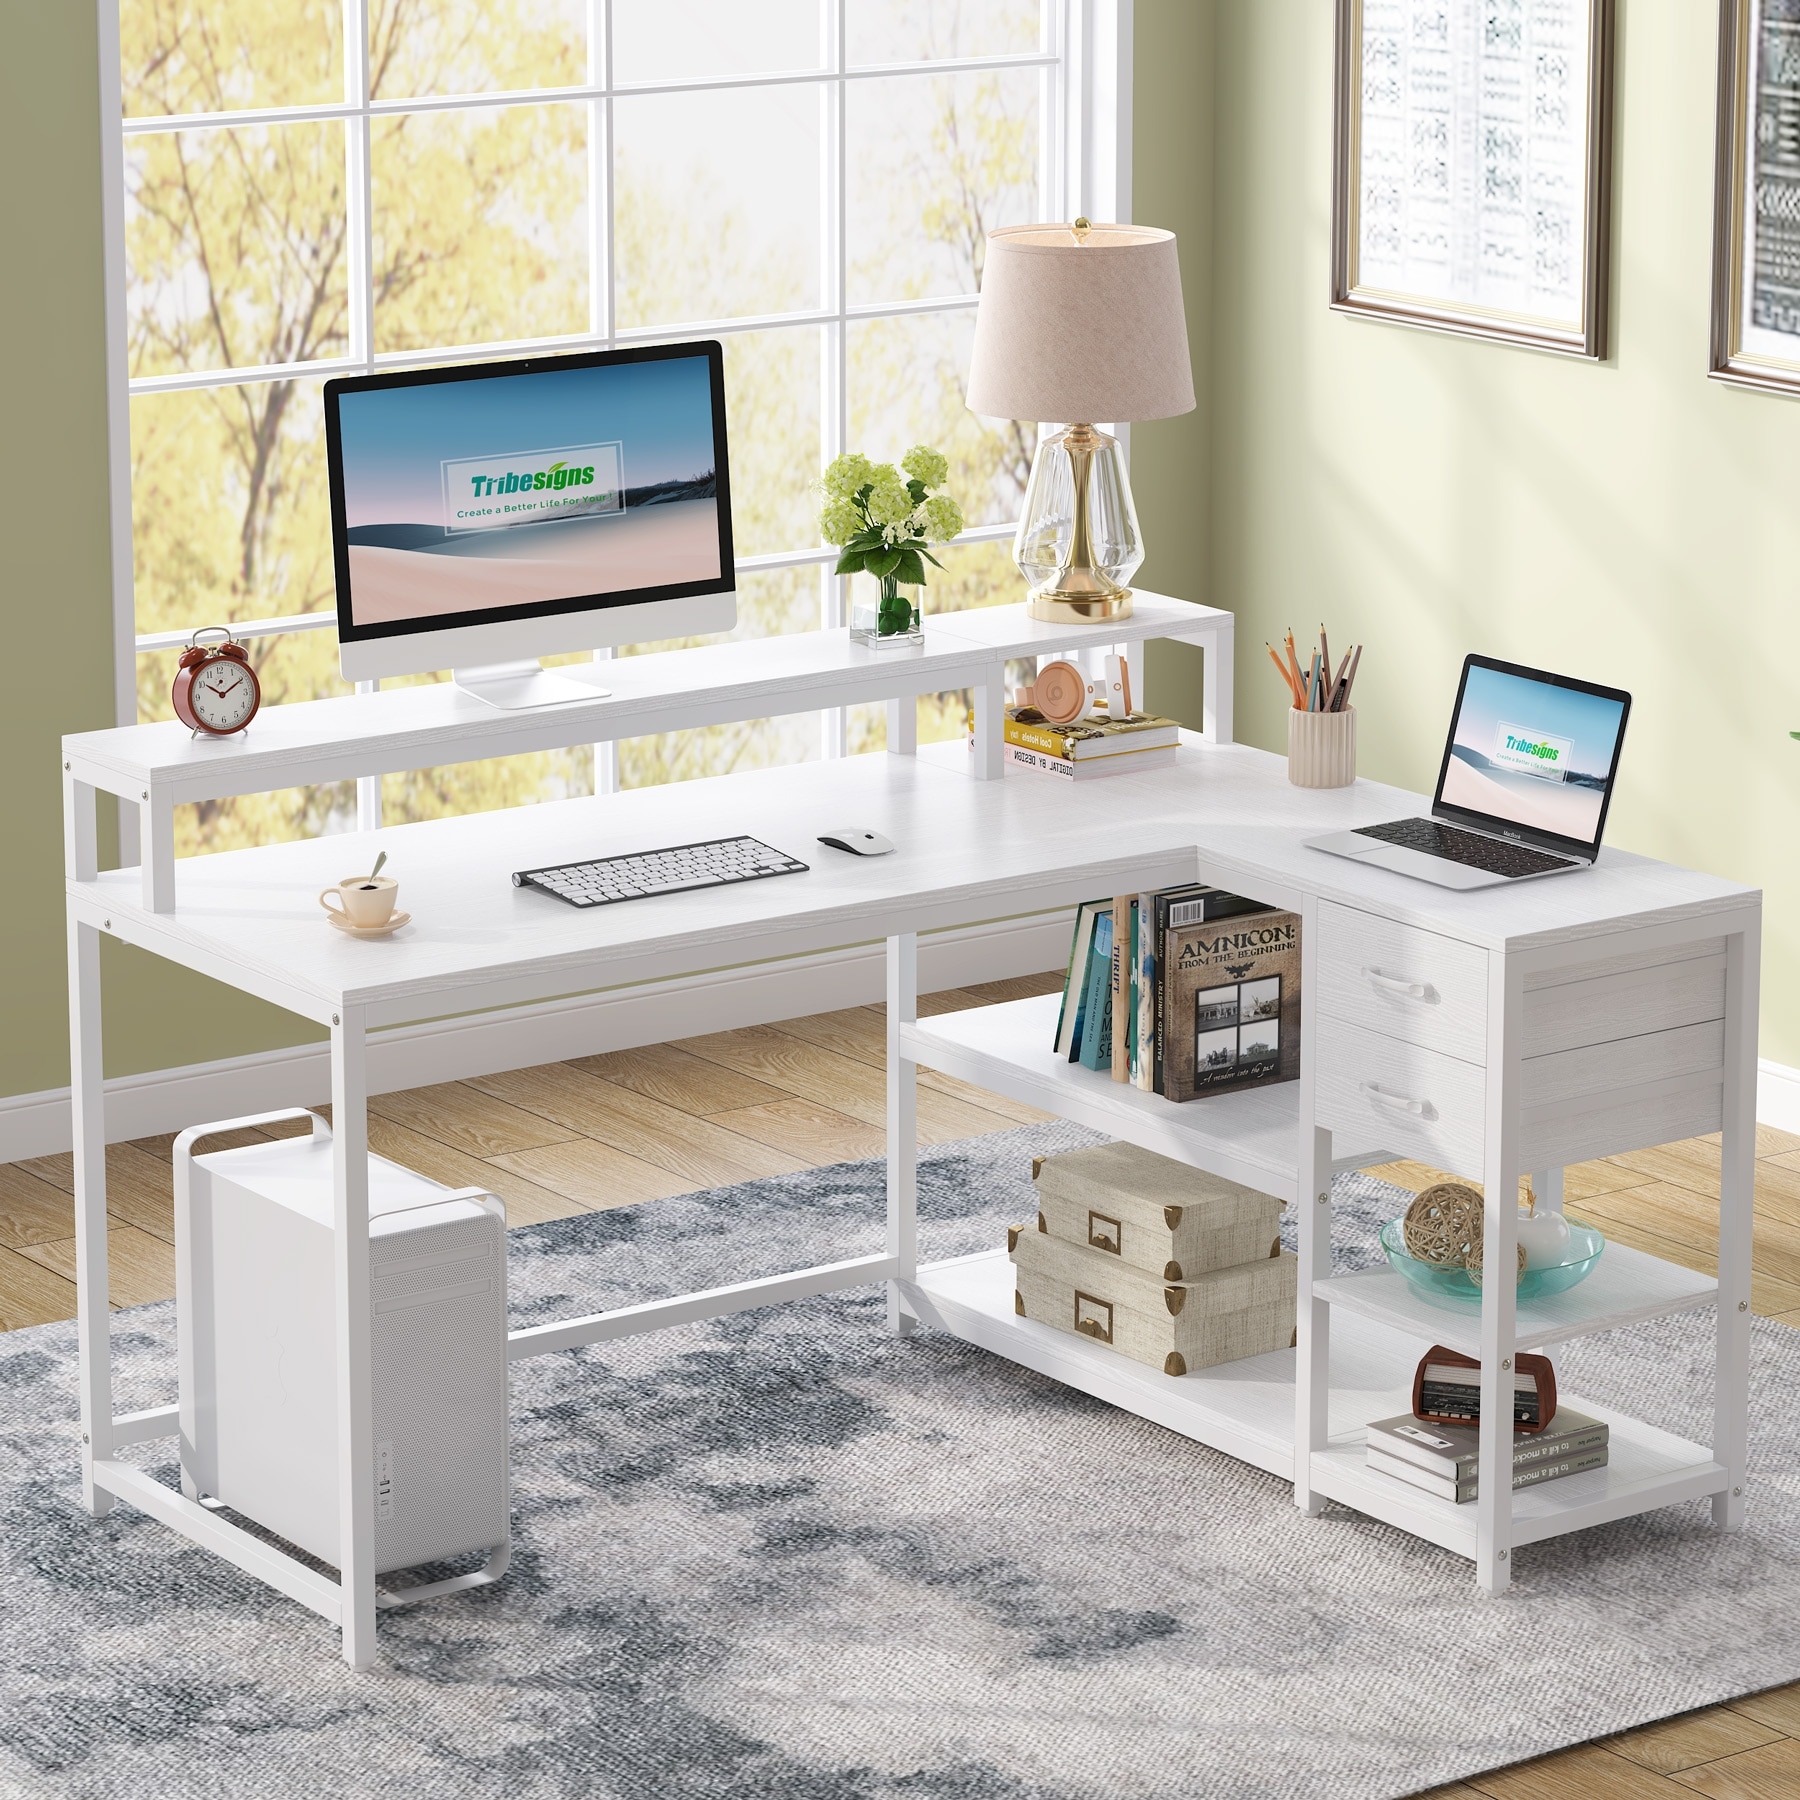 https://ak1.ostkcdn.com/images/products/is/images/direct/faf0c0832d0f93d943f2f1b5920ea0c4d18092c2/L-Shaped-Desk-with-Drawer%2C-Home-Office-Corner-Desk-with-Storage-Shelves-and-Monitor-Stand%2C-Rustic-PC-Desk-for-Small-Space.jpg